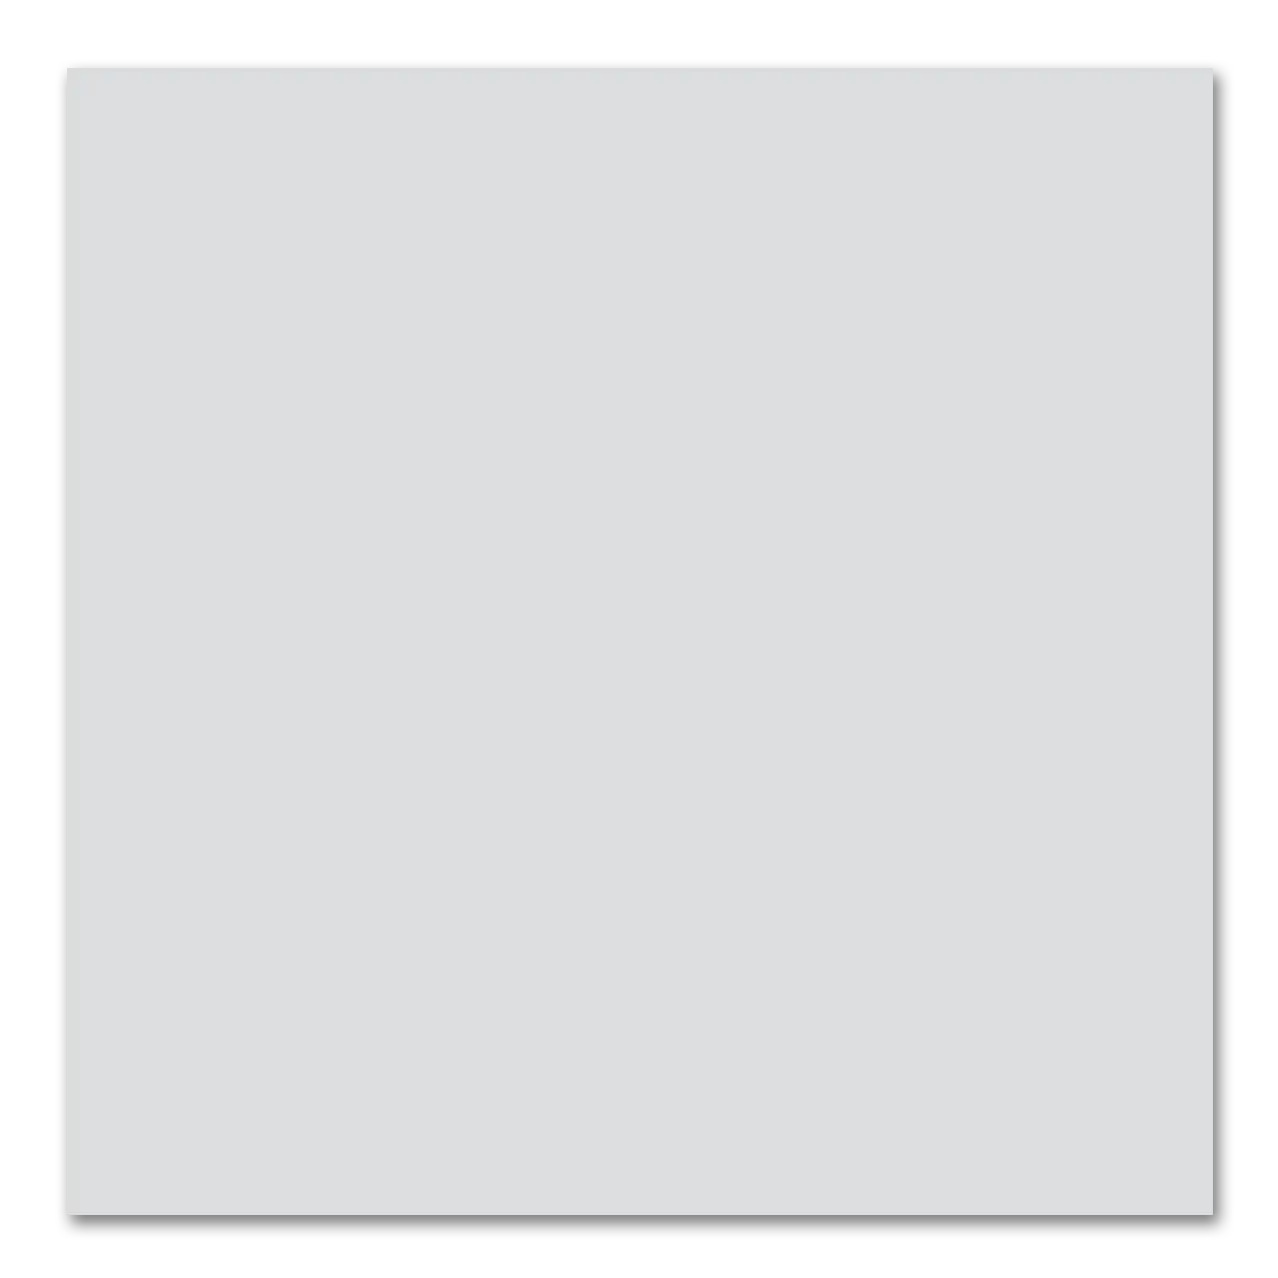 Color Collection Tender Grey Ceramic Wall Tile 4”x4” Matte